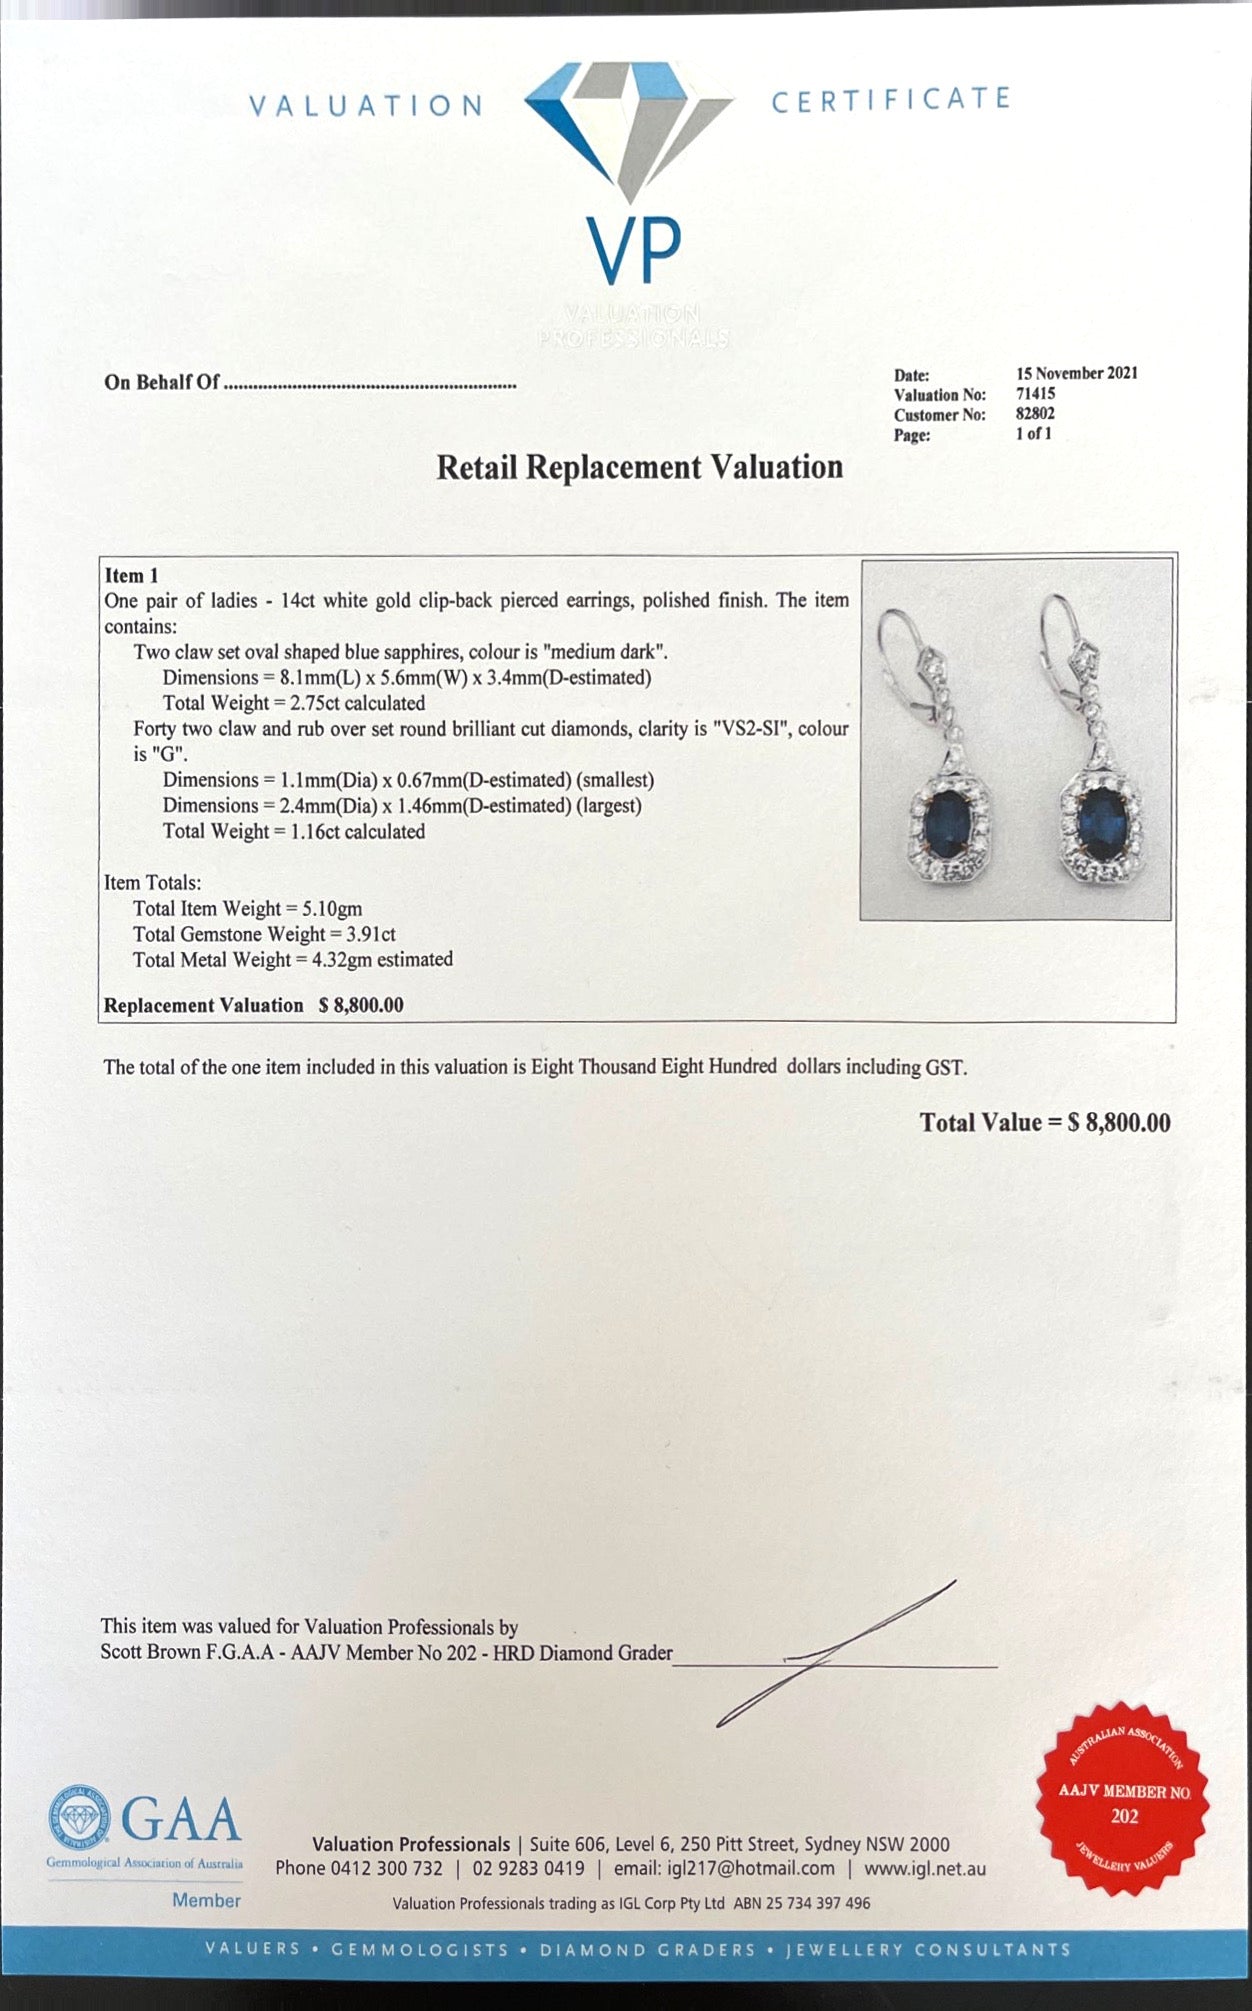 14CT White Gold Sapphire and Diamond Earrings